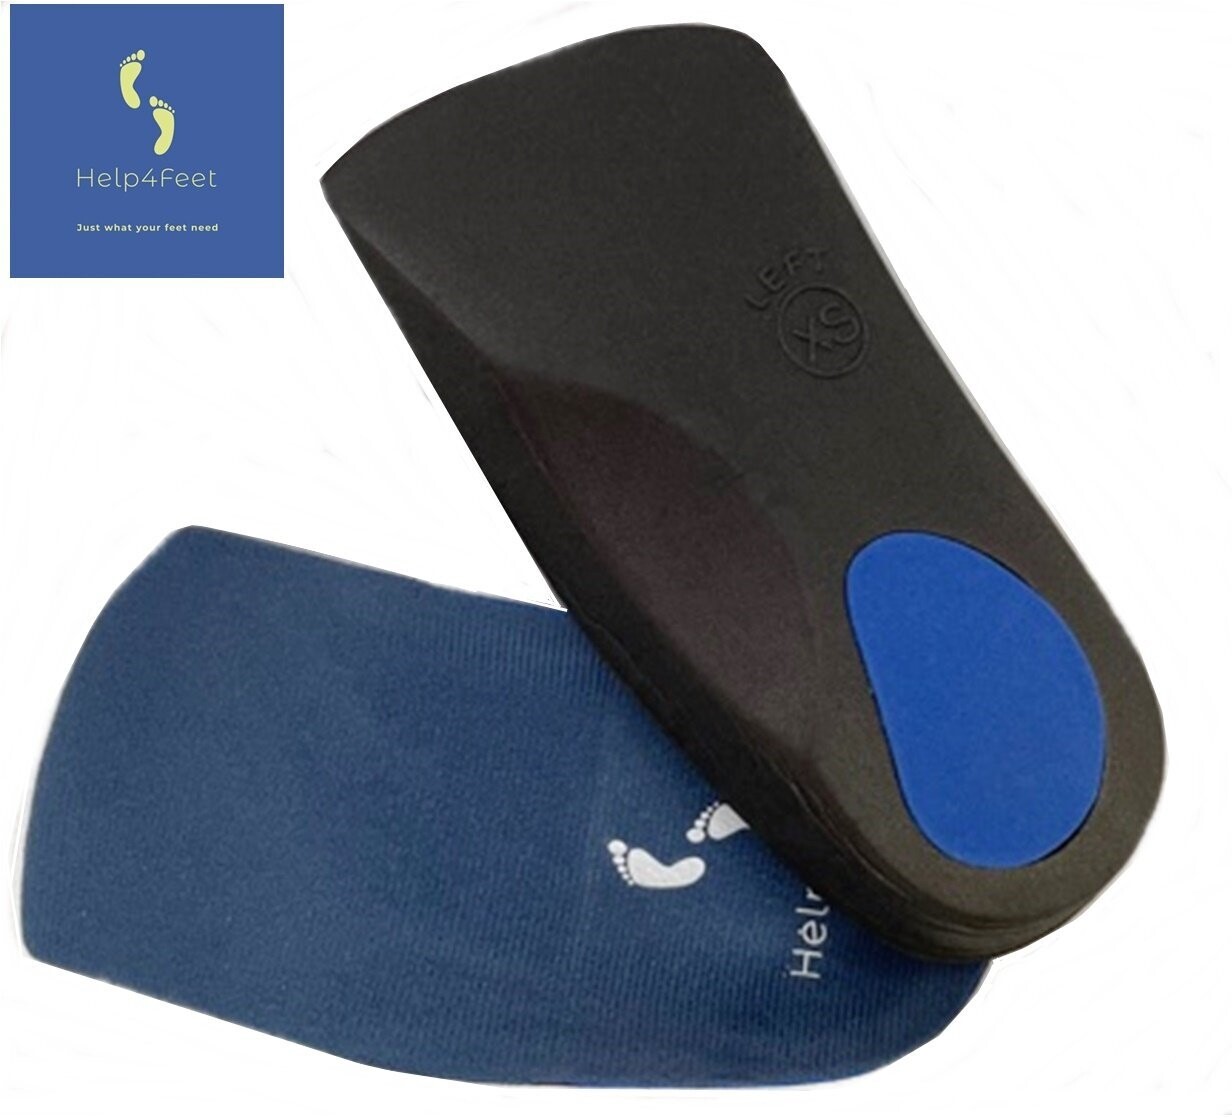 H4F Orthotic Insoles Breathable for Plantar Fasciitis Foot back leg pain 3/4 Size SMALL (5-6uk)Multibuy Avaliable 1,2,or 4 pairs!!